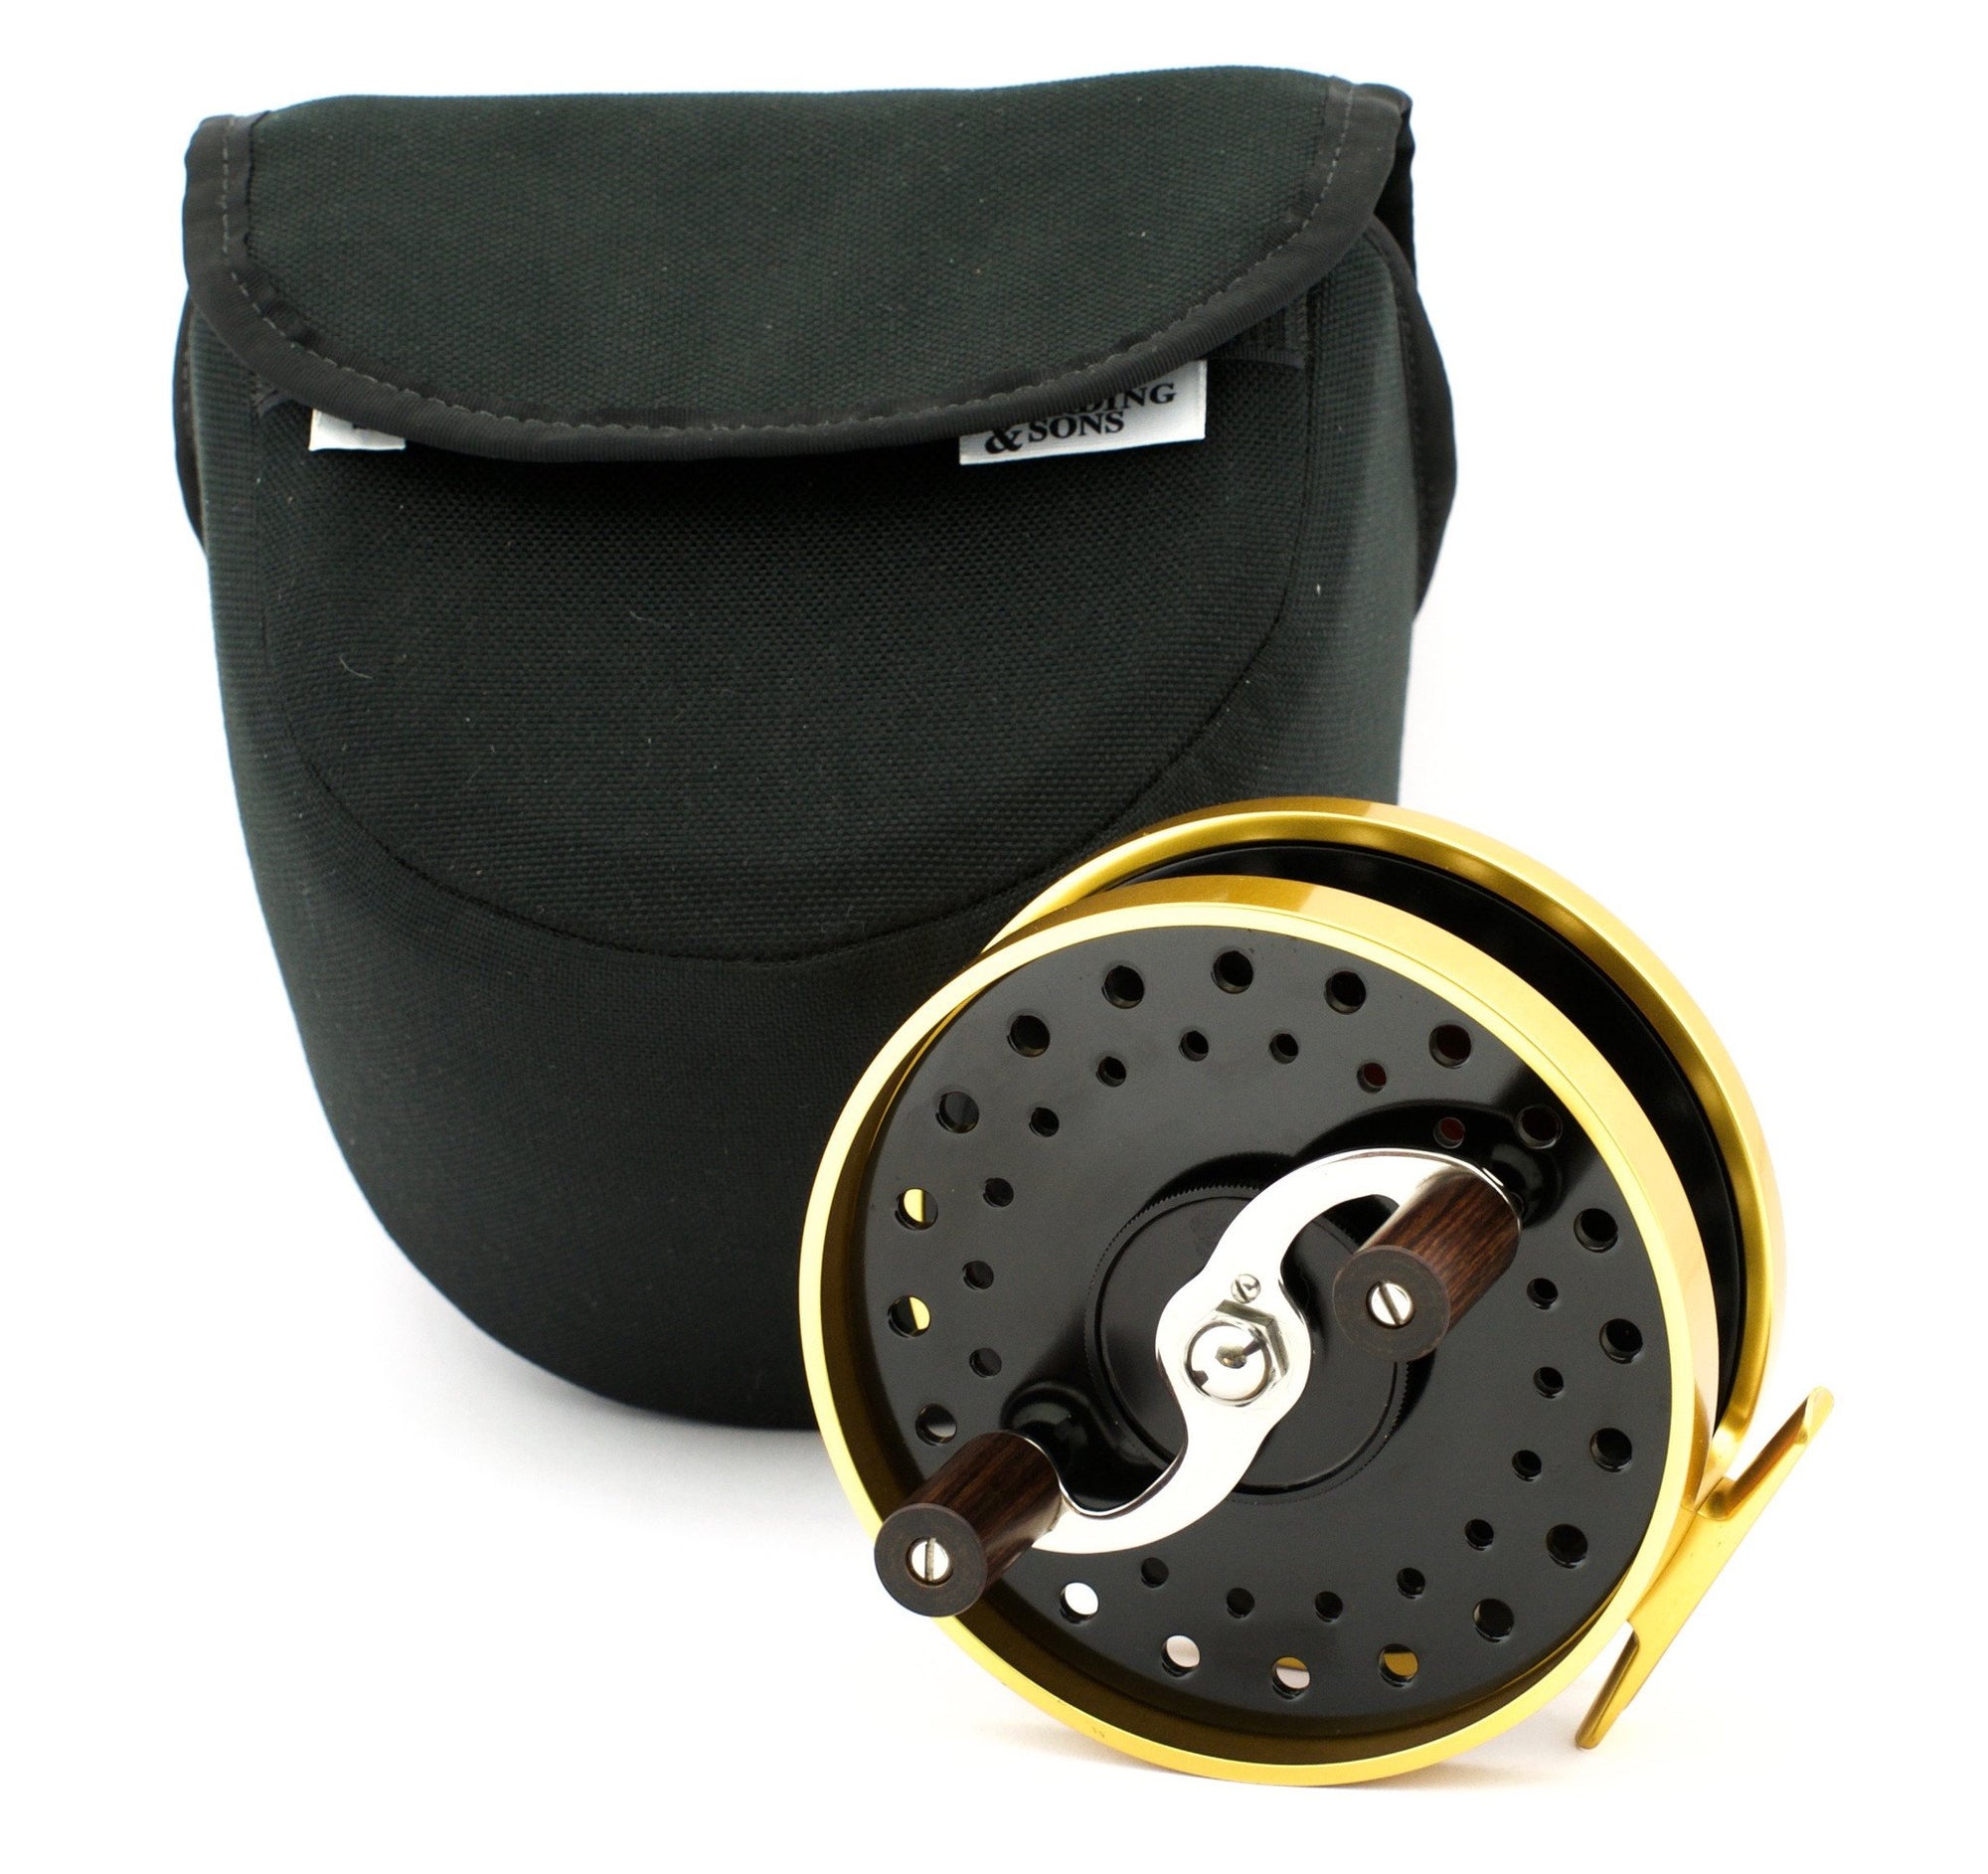 McNeese Limited Edition "Spey" Fly Reel 